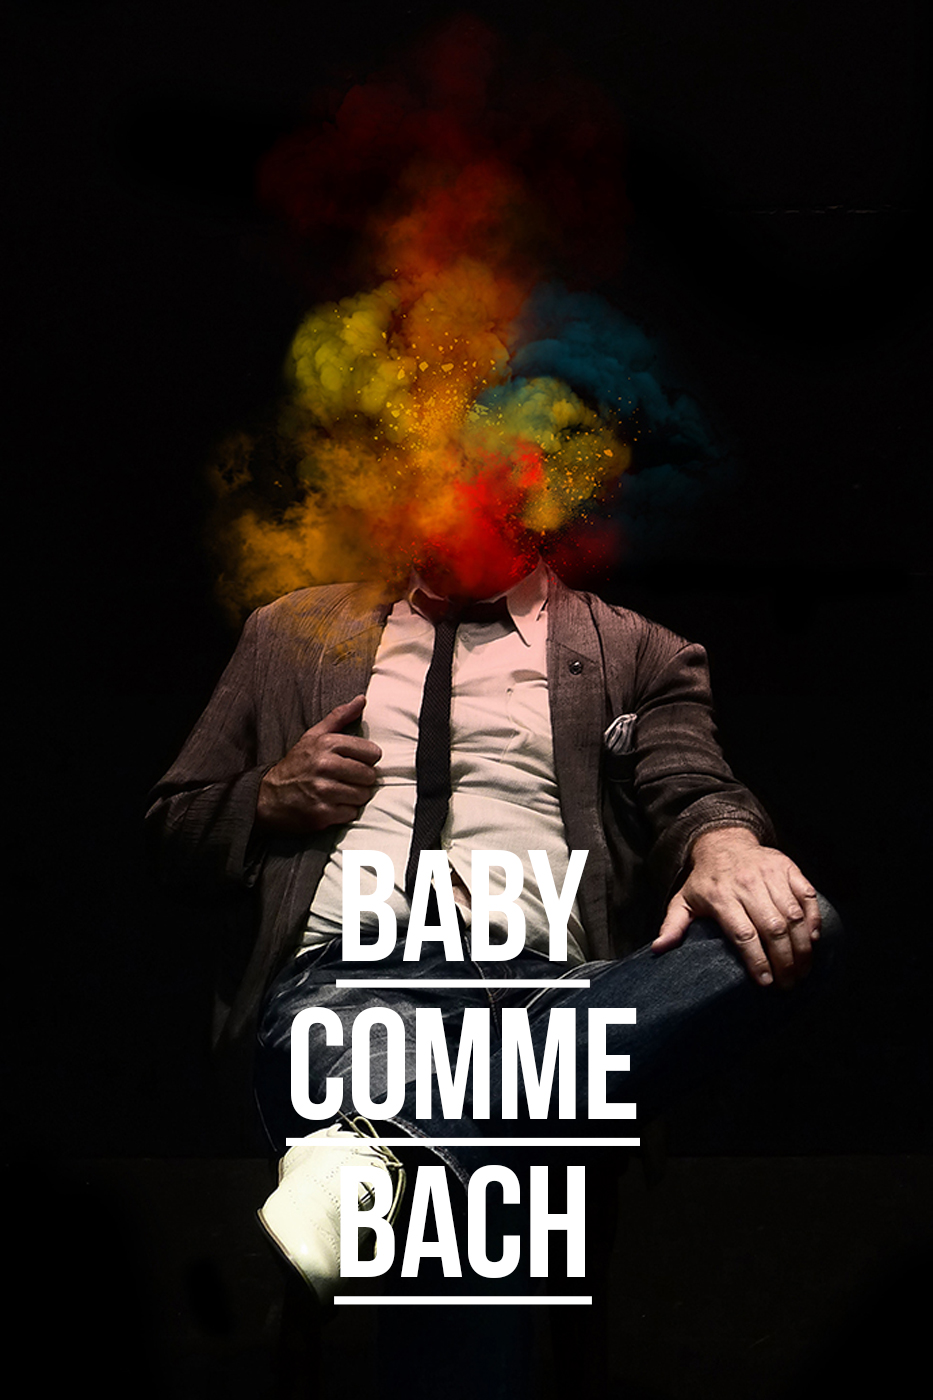 BABY COMME BACH